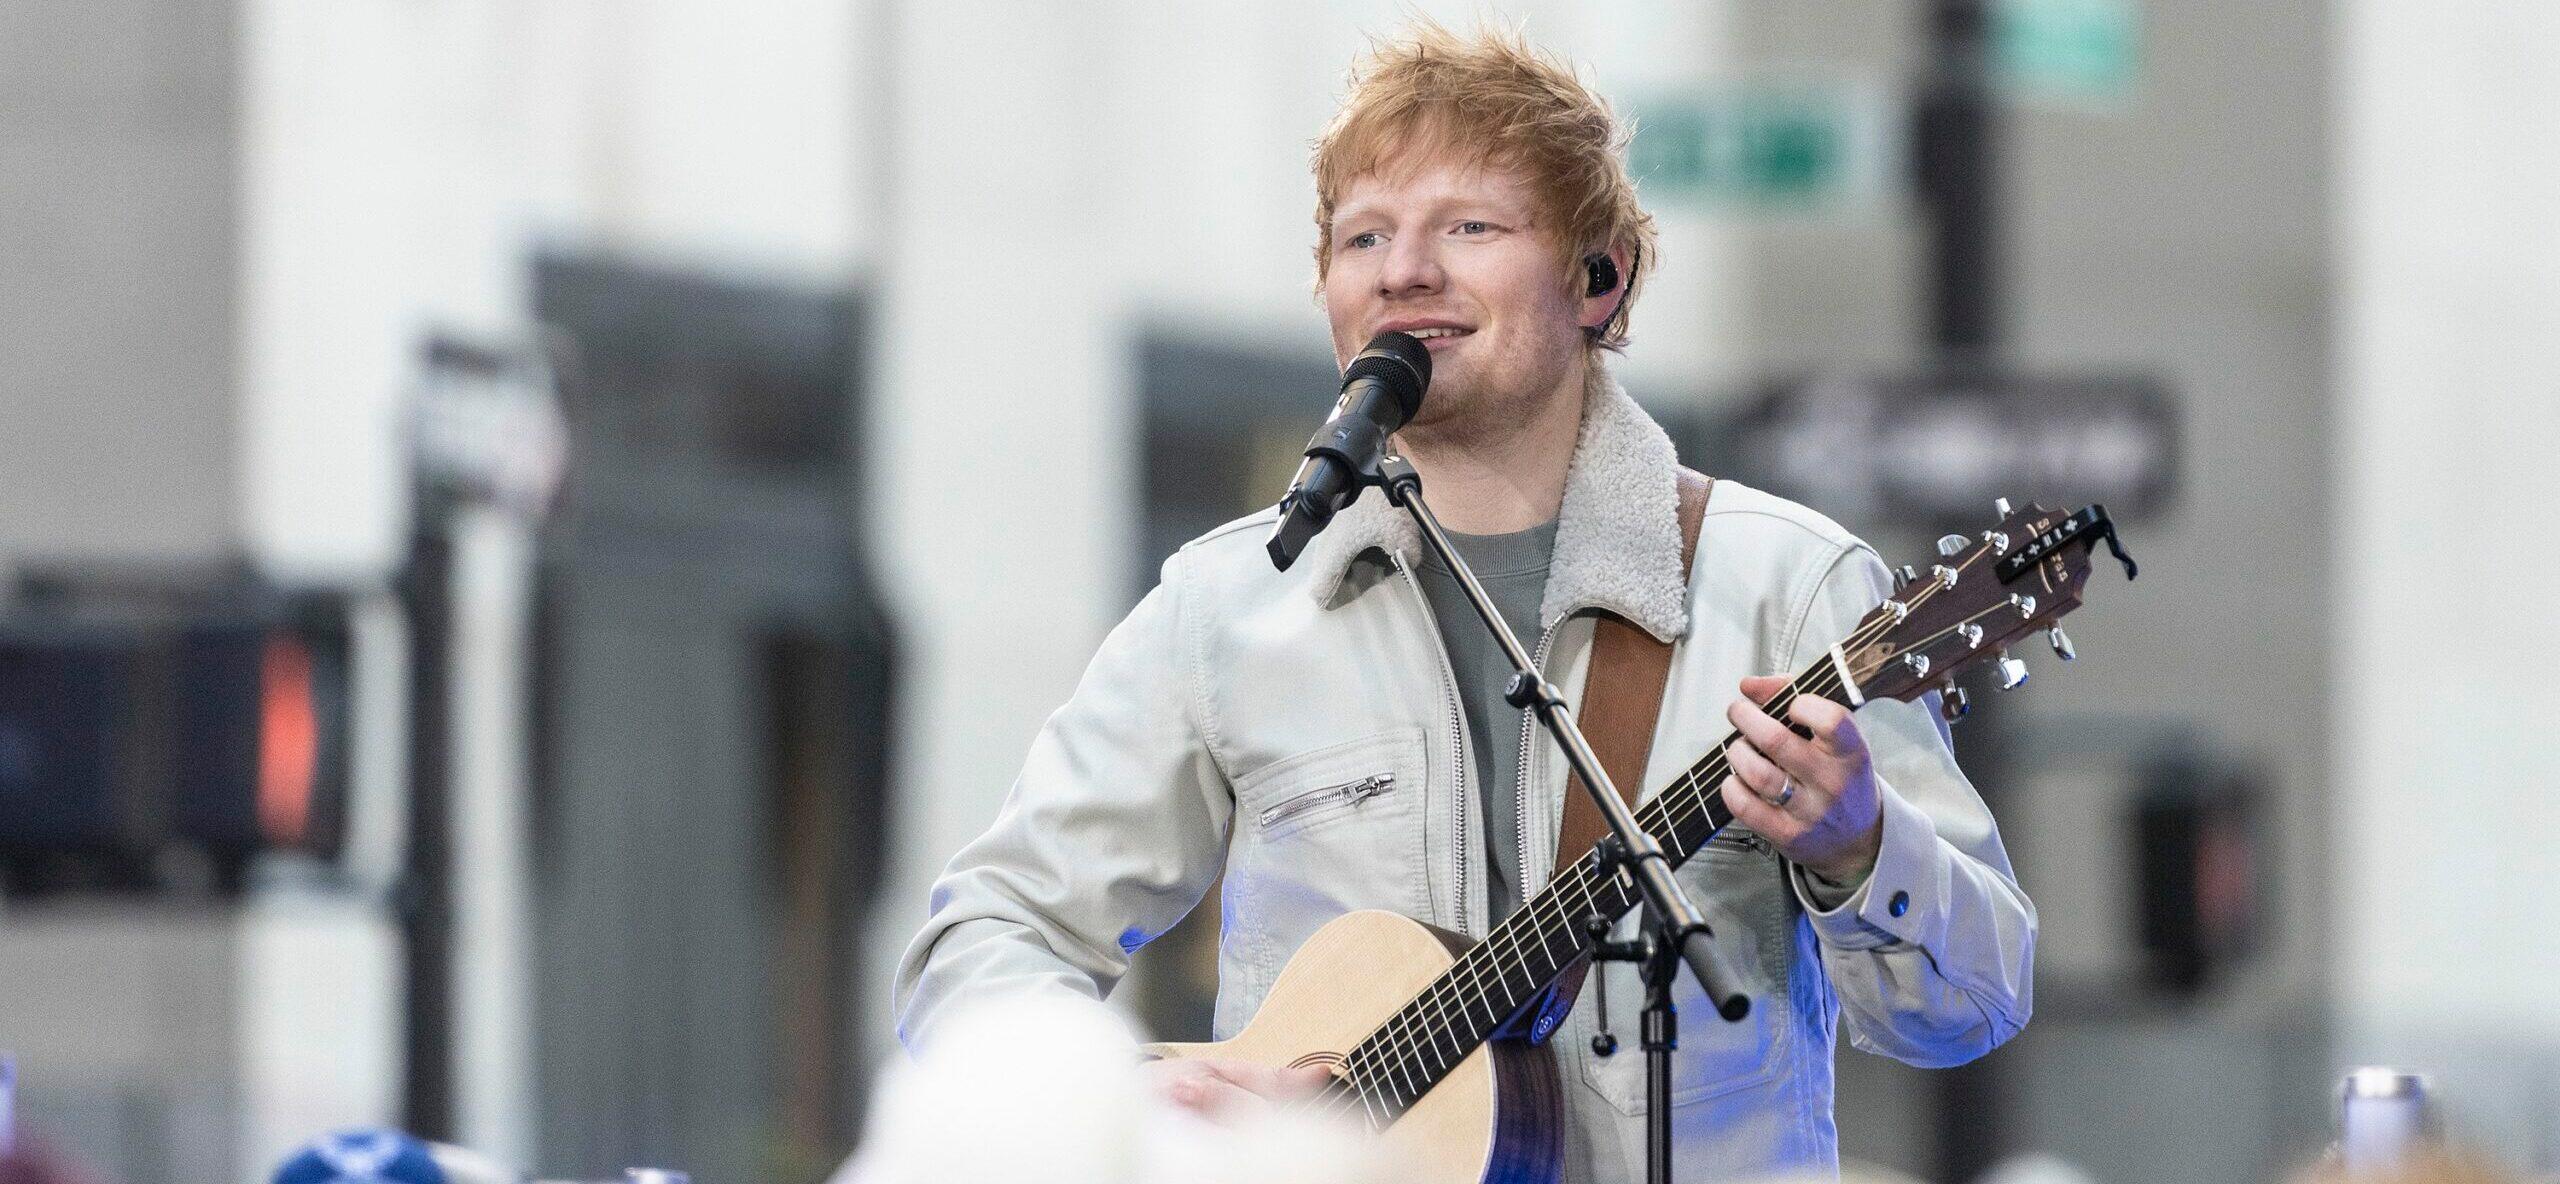 Ed Sheeran performing live on TODAY show at NBC